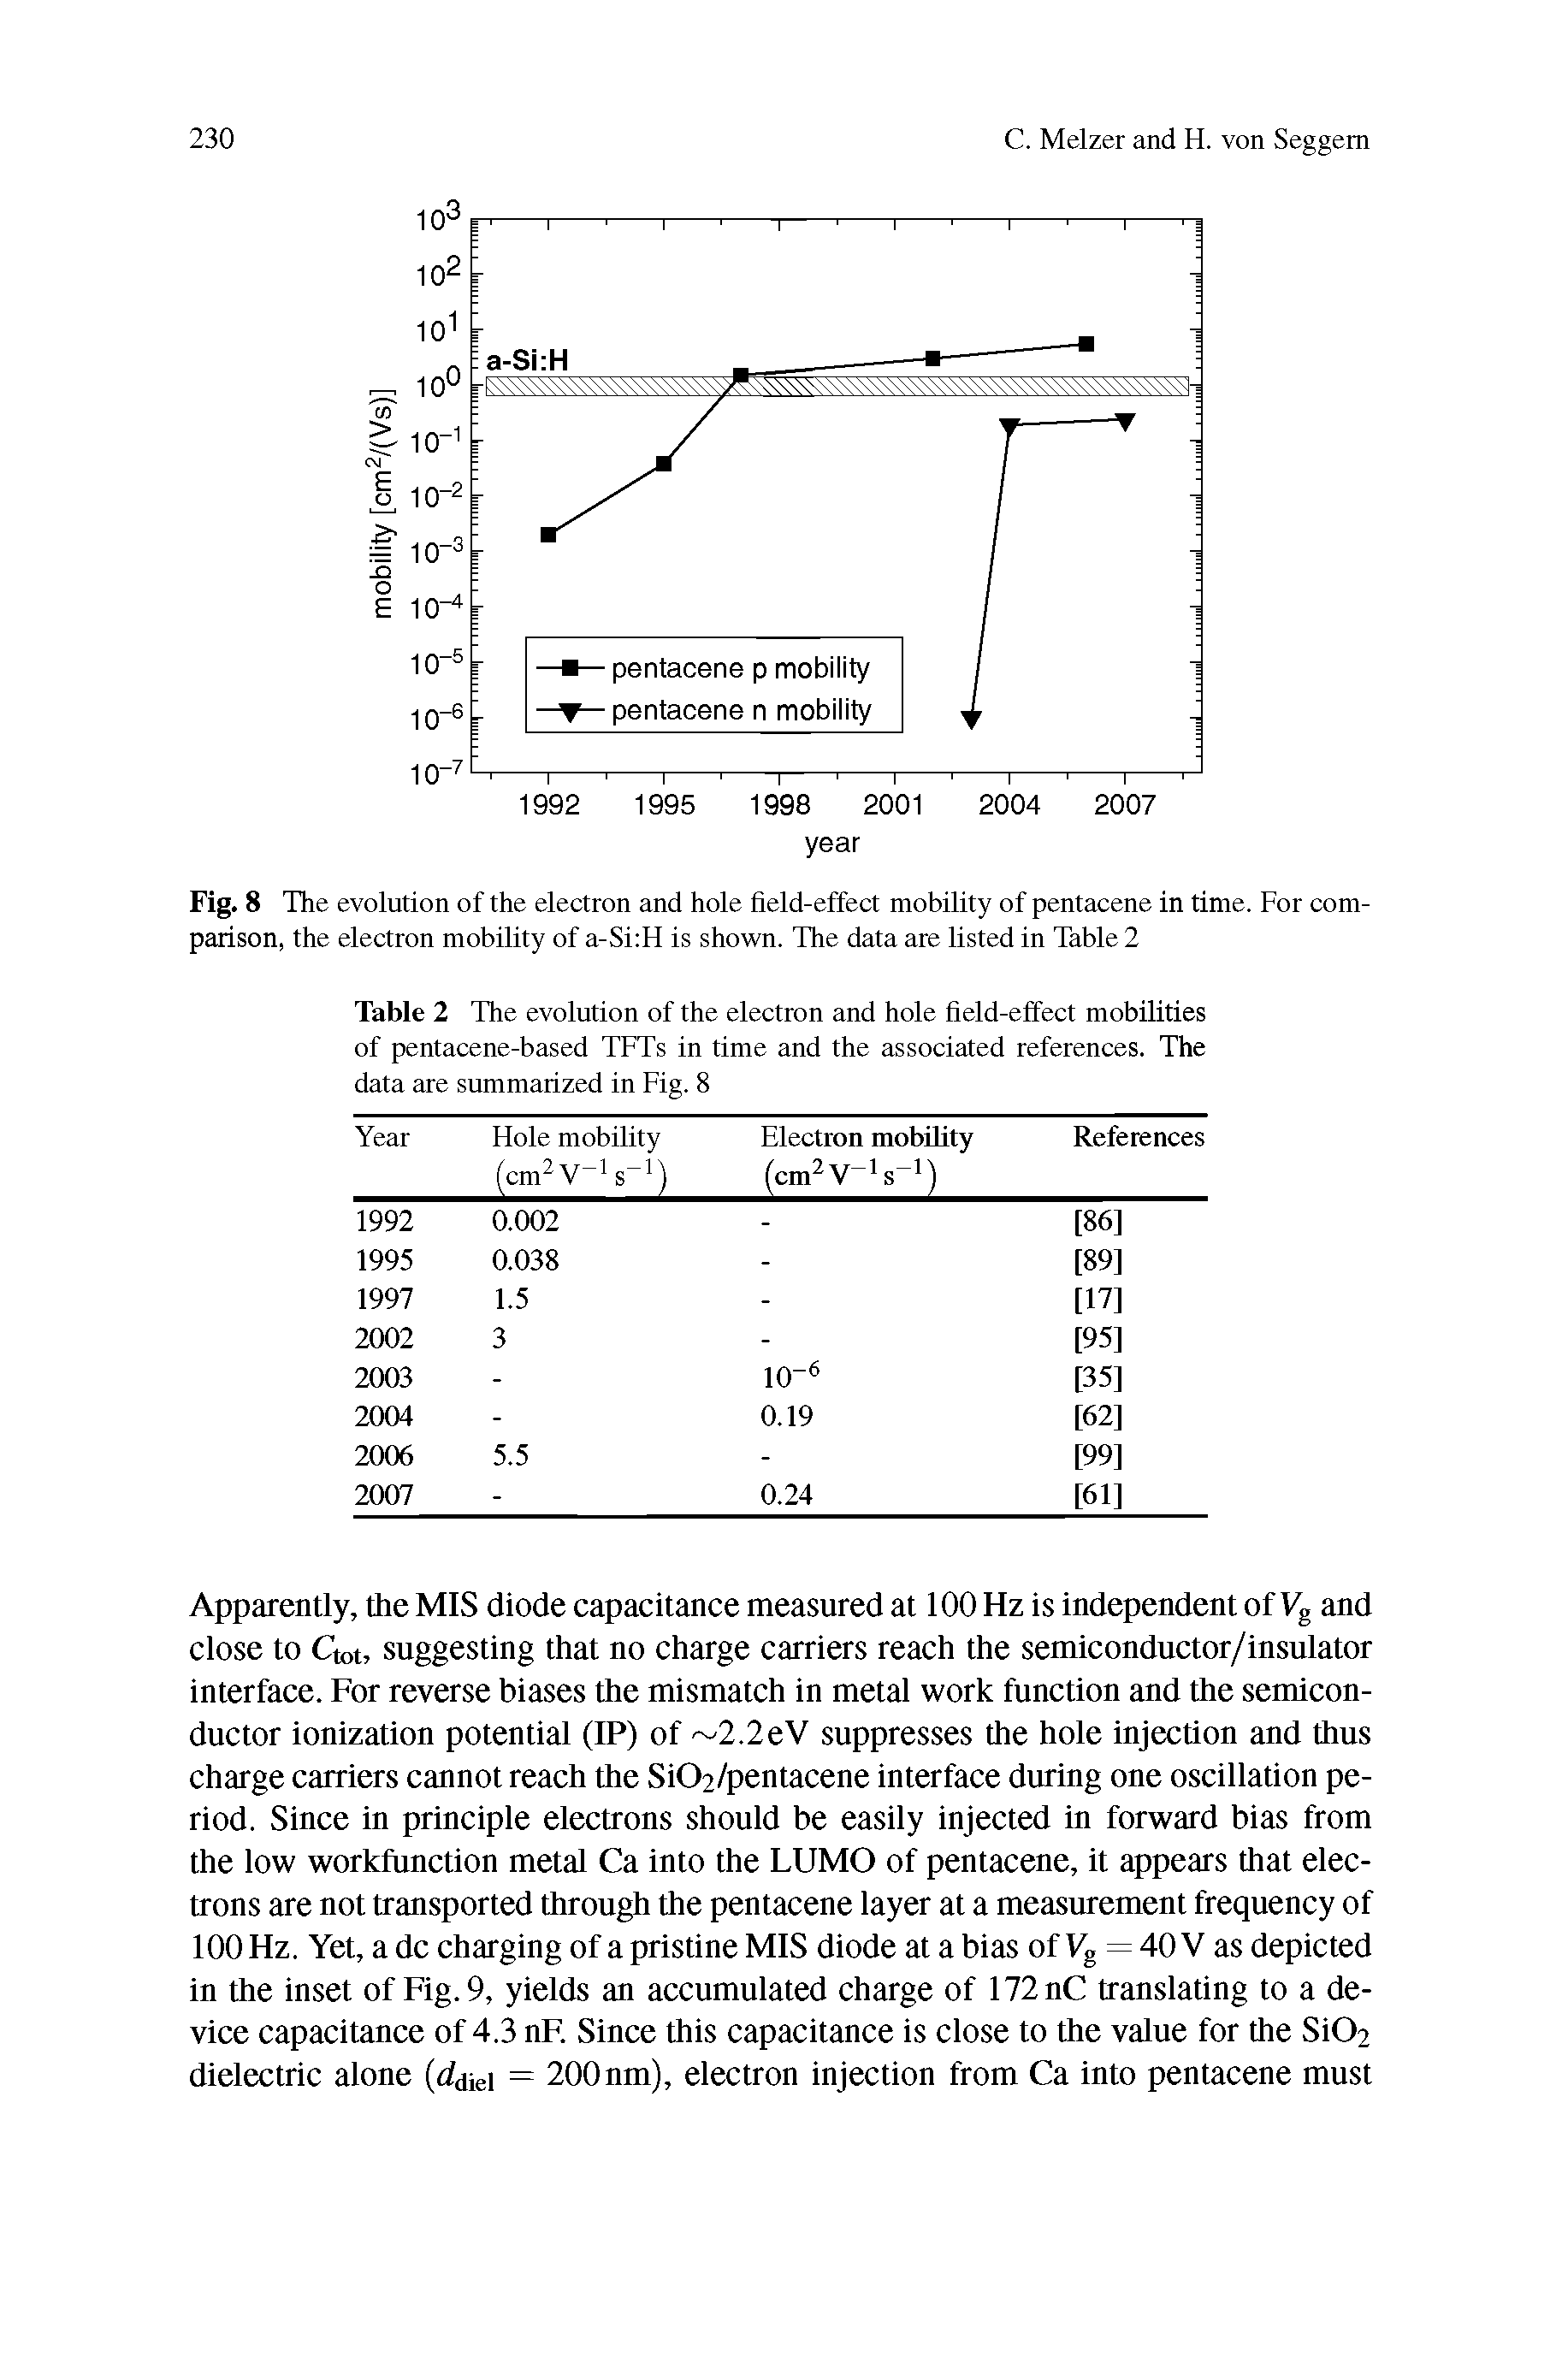 Fig. 8 The evolution of the electron and hole field-effect mobility of pentacene in time. For comparison, the electron mobility of a-Si H is shown. The data are listed in Table 2...